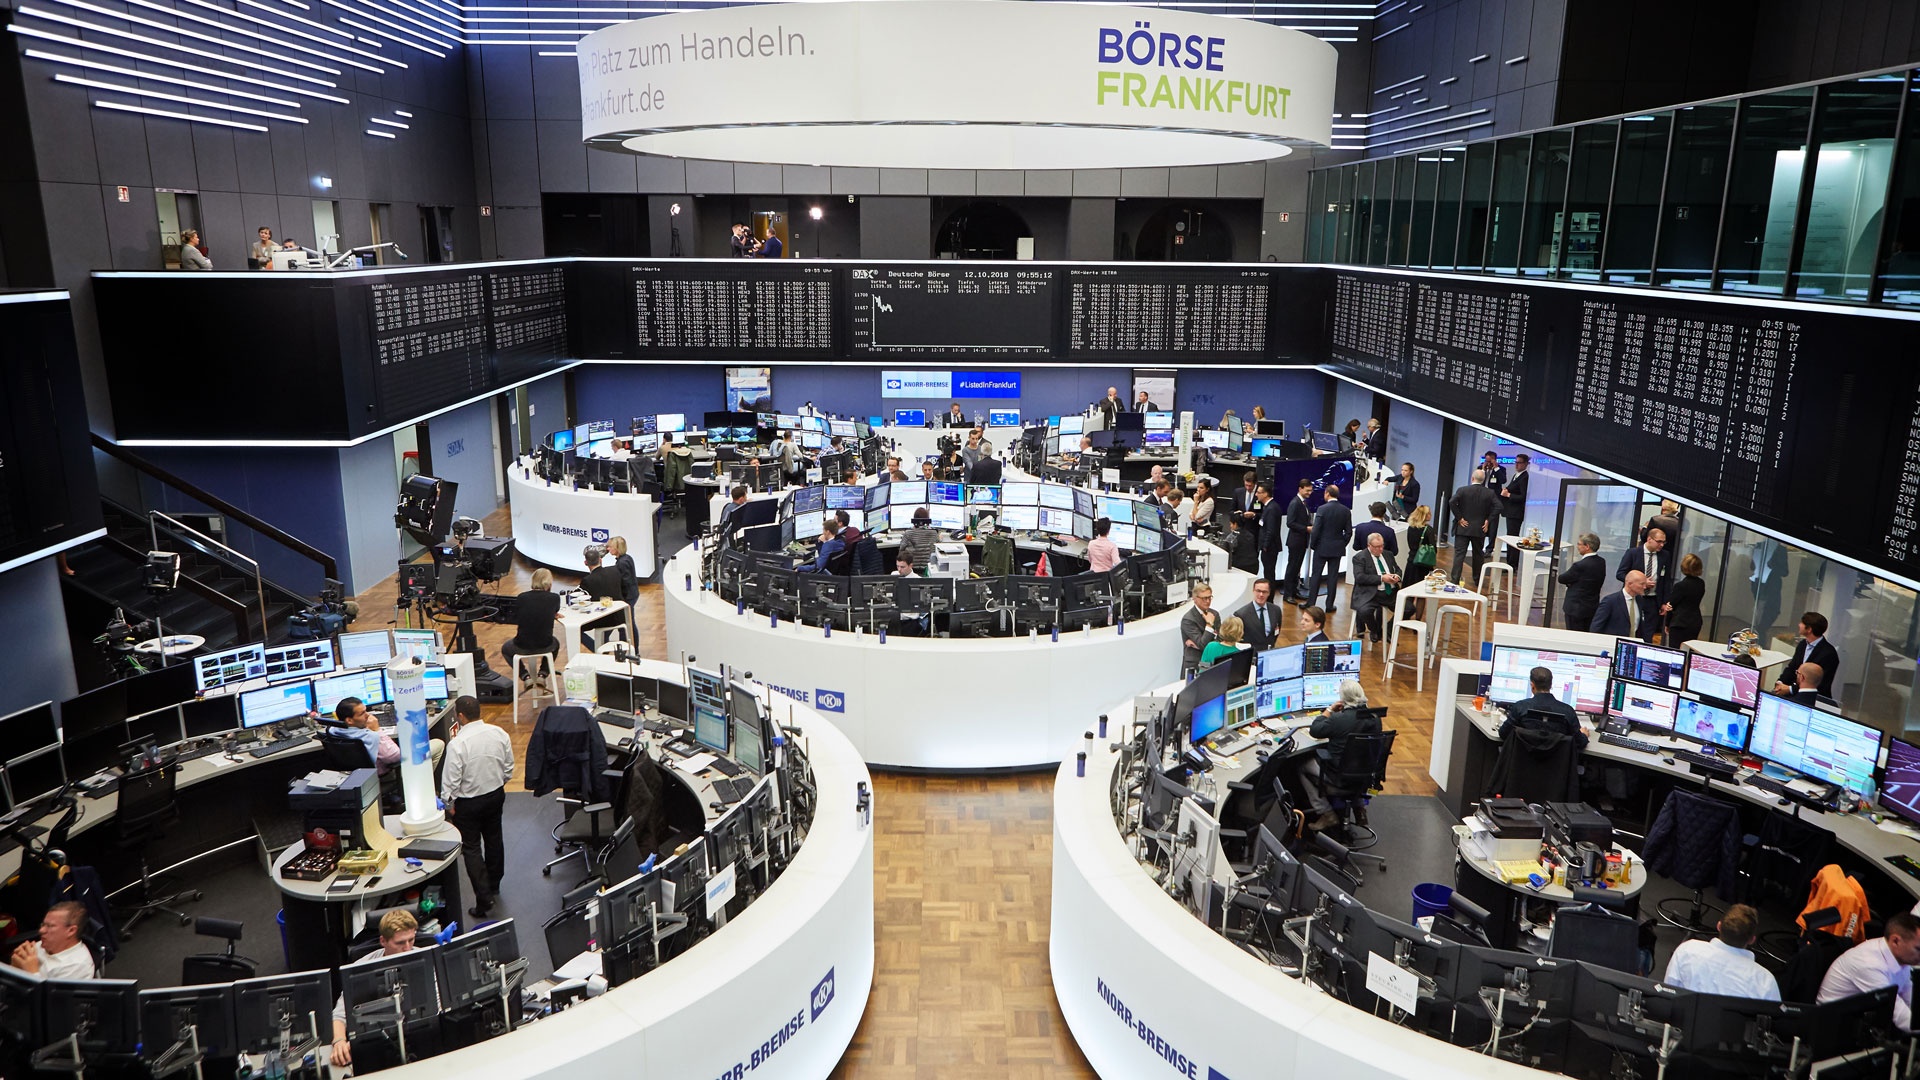 The busy floor of the Frankfurt Stock Exchange with islands for the traders – adorned with Knorr-Bremse logos on the day of the IPO.